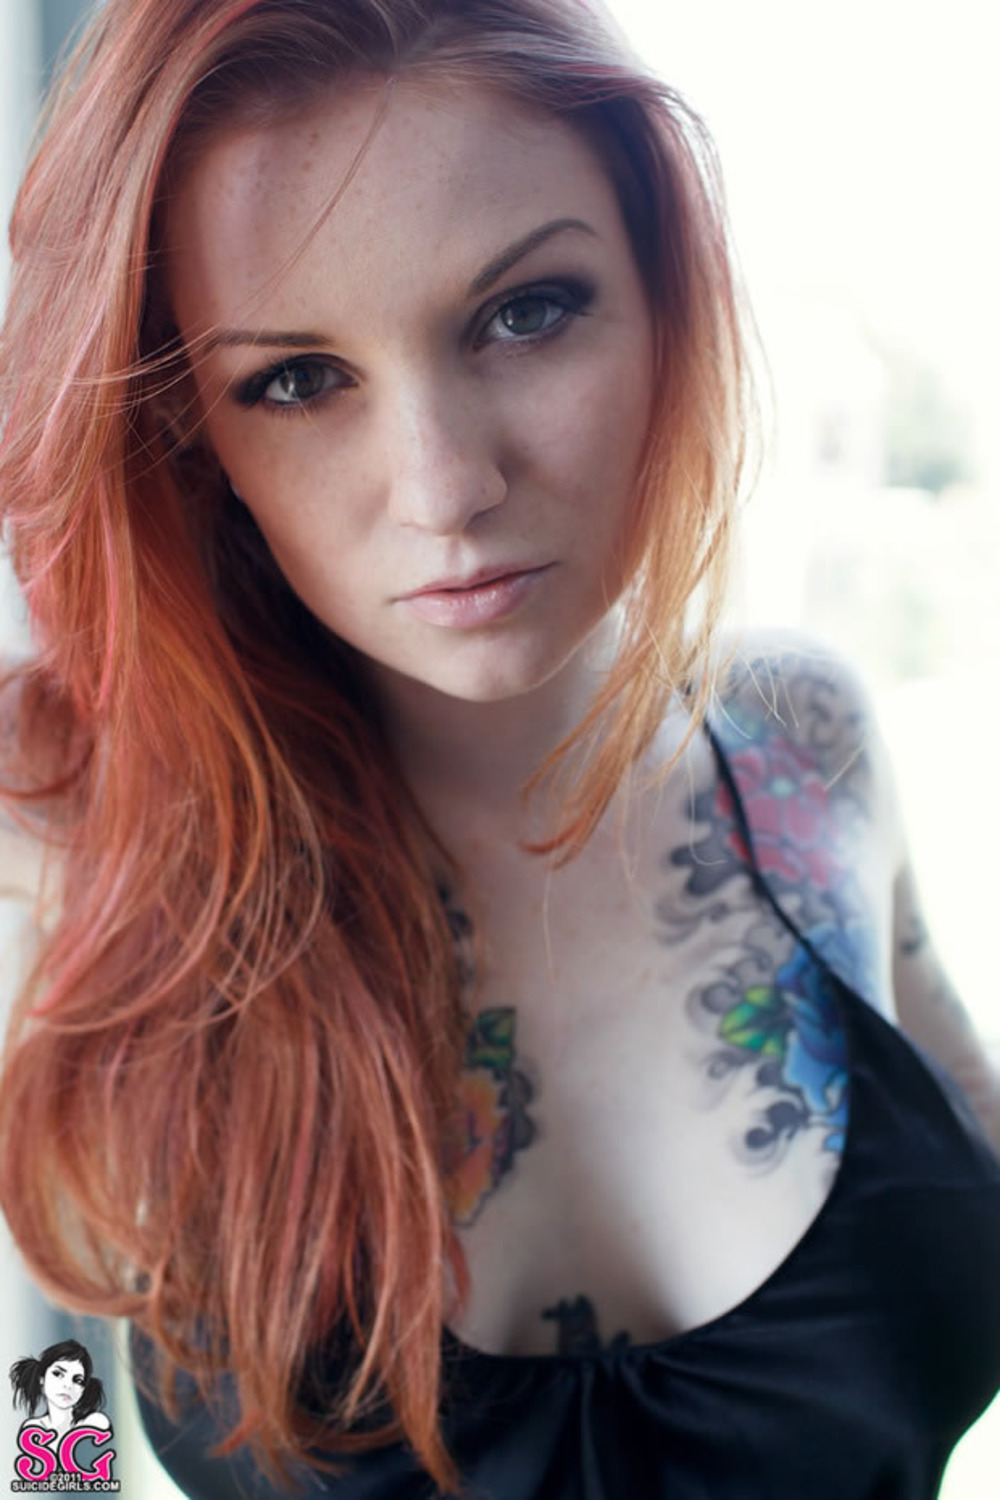 Tattooed Girl Showing Off Her Star Wars Tattooes 01